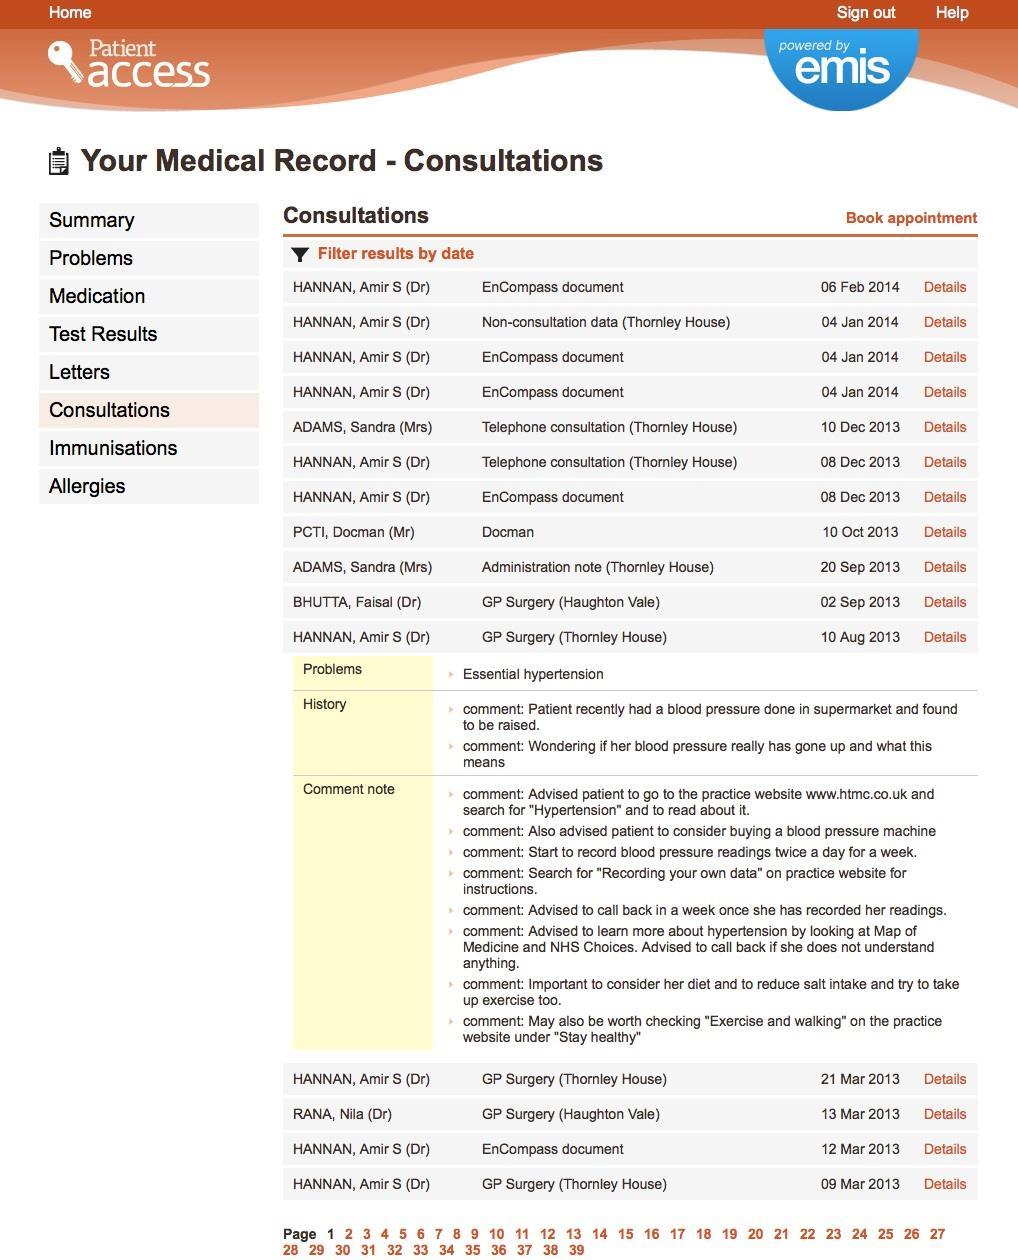 consultation Encompass documents are Instant Medical History questionnaires which allow you to complete a questionnaire about certain symptoms such as